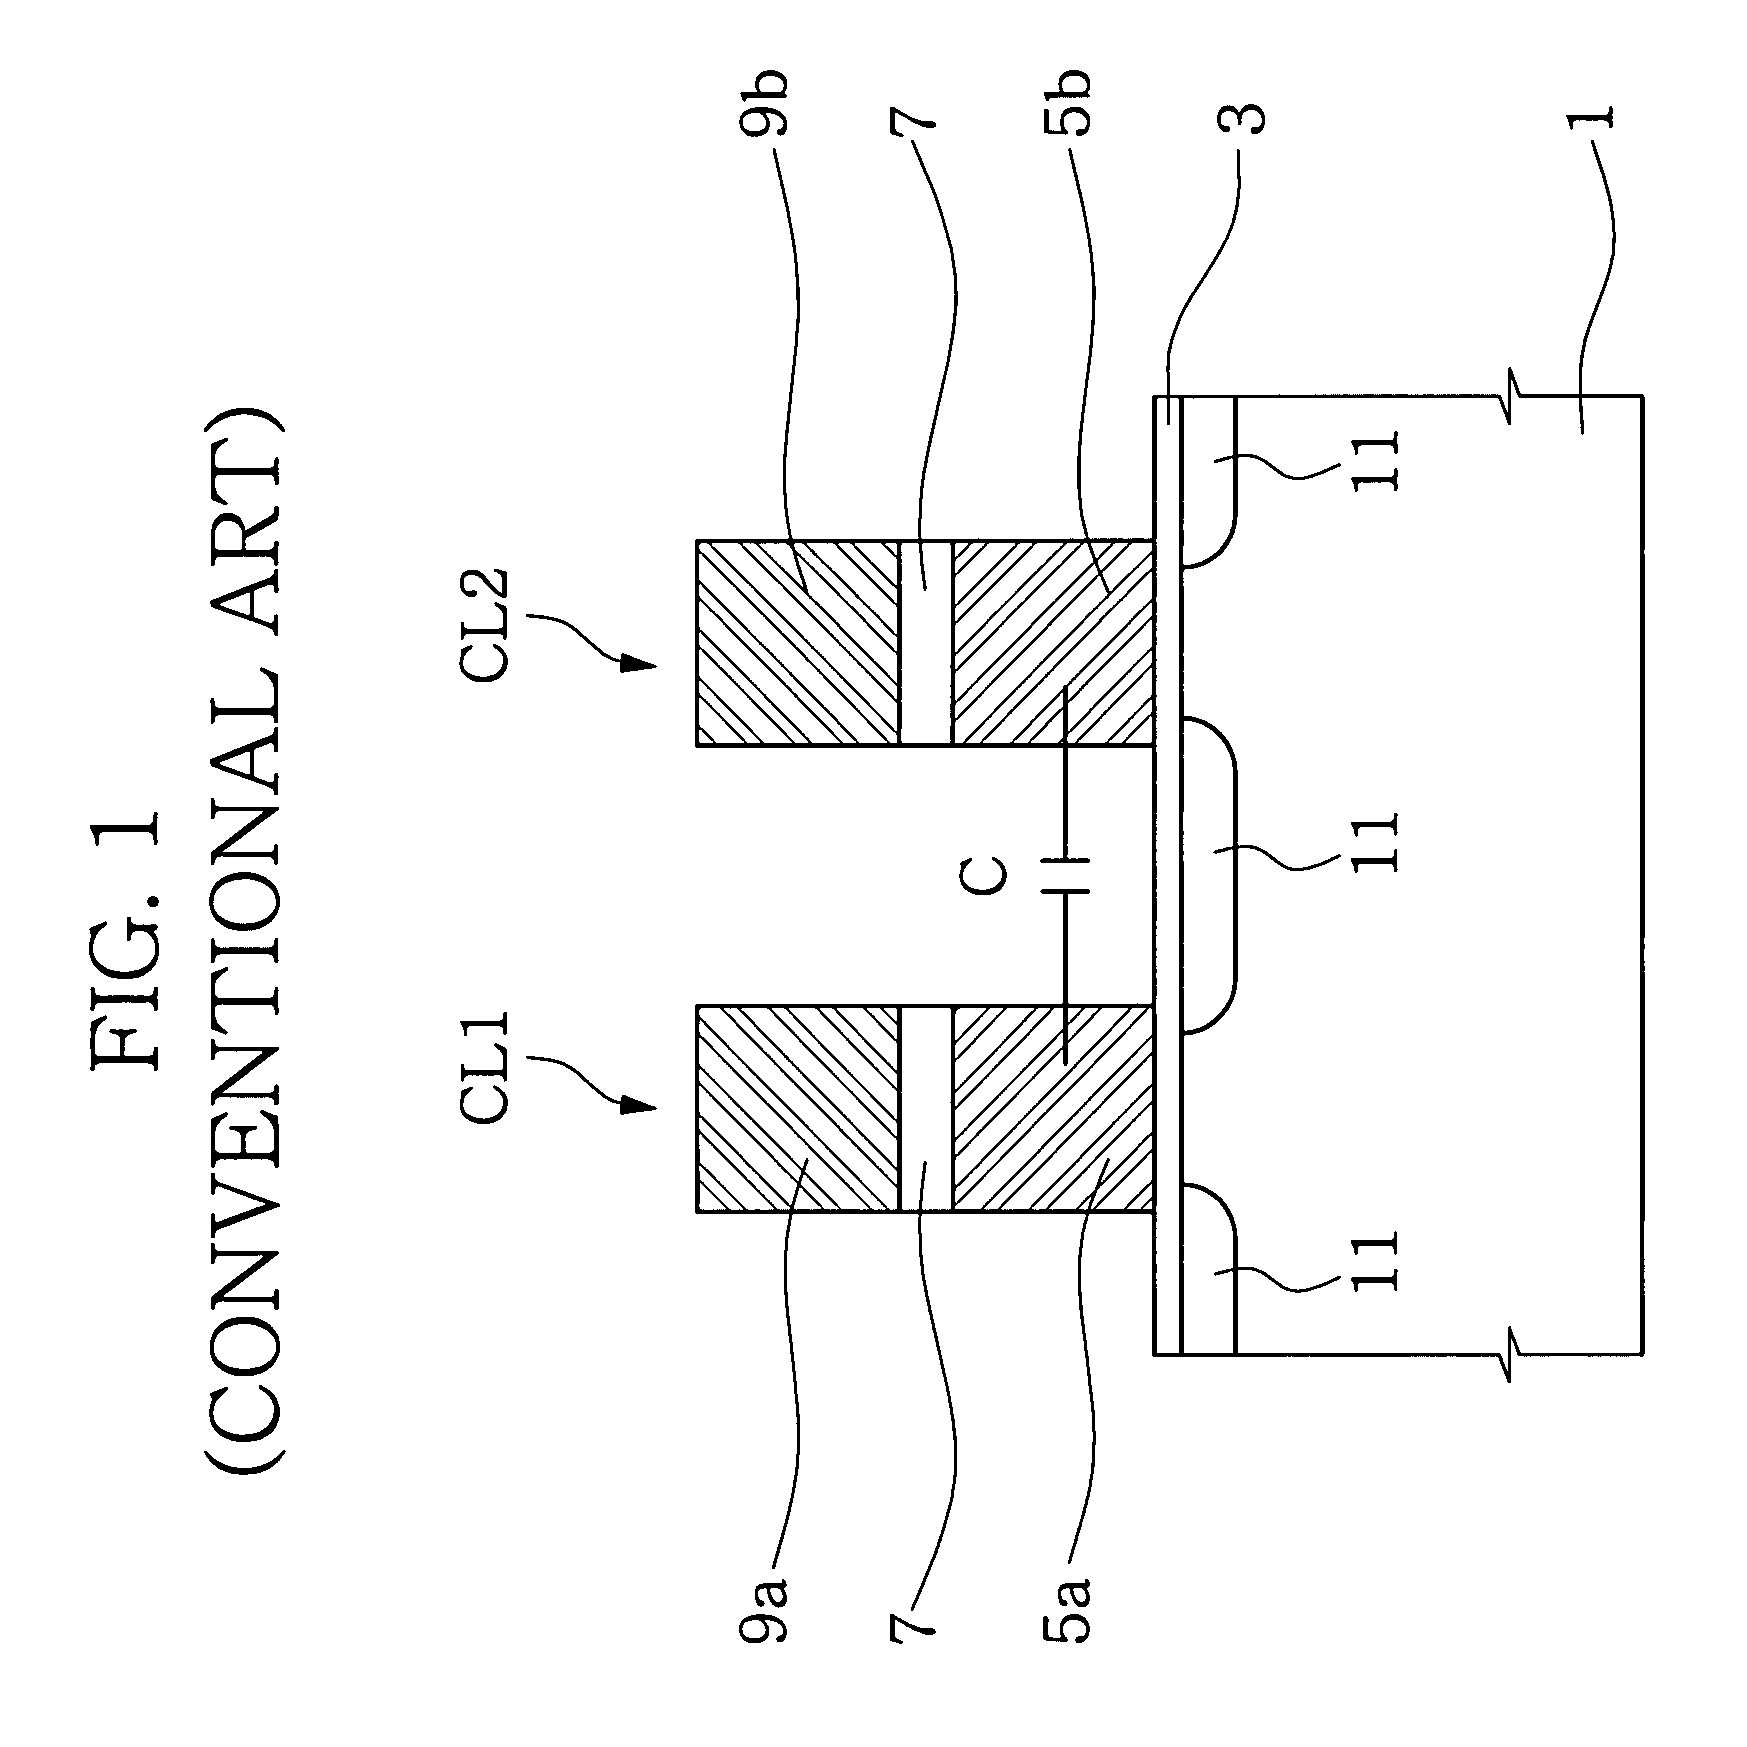 Flash memory device and method of fabricating the same